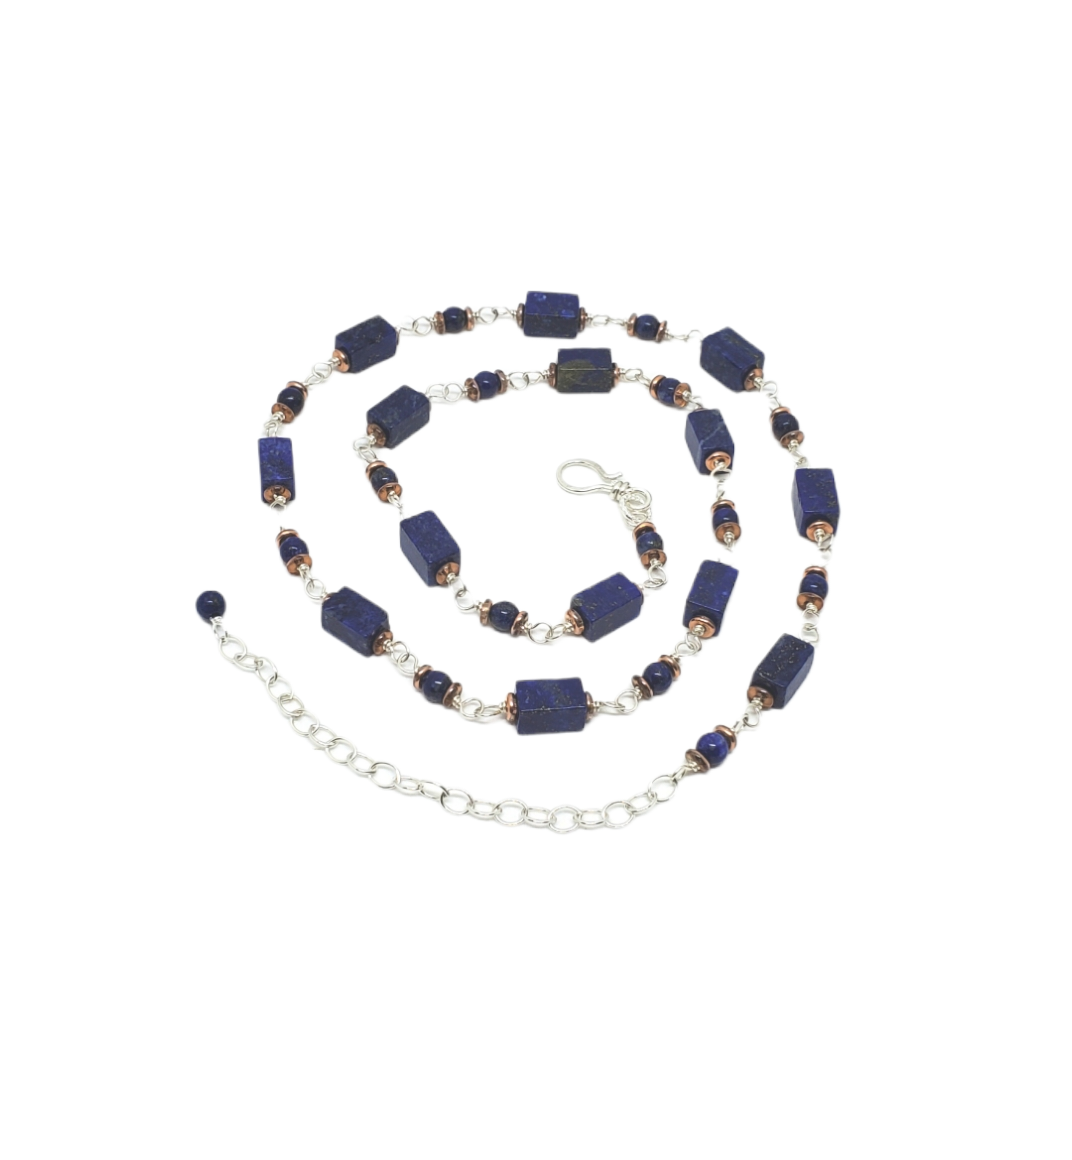 Lapis chain necklace, 6x9mm rectangle Lapiz gemstone with Sterling Silver wire